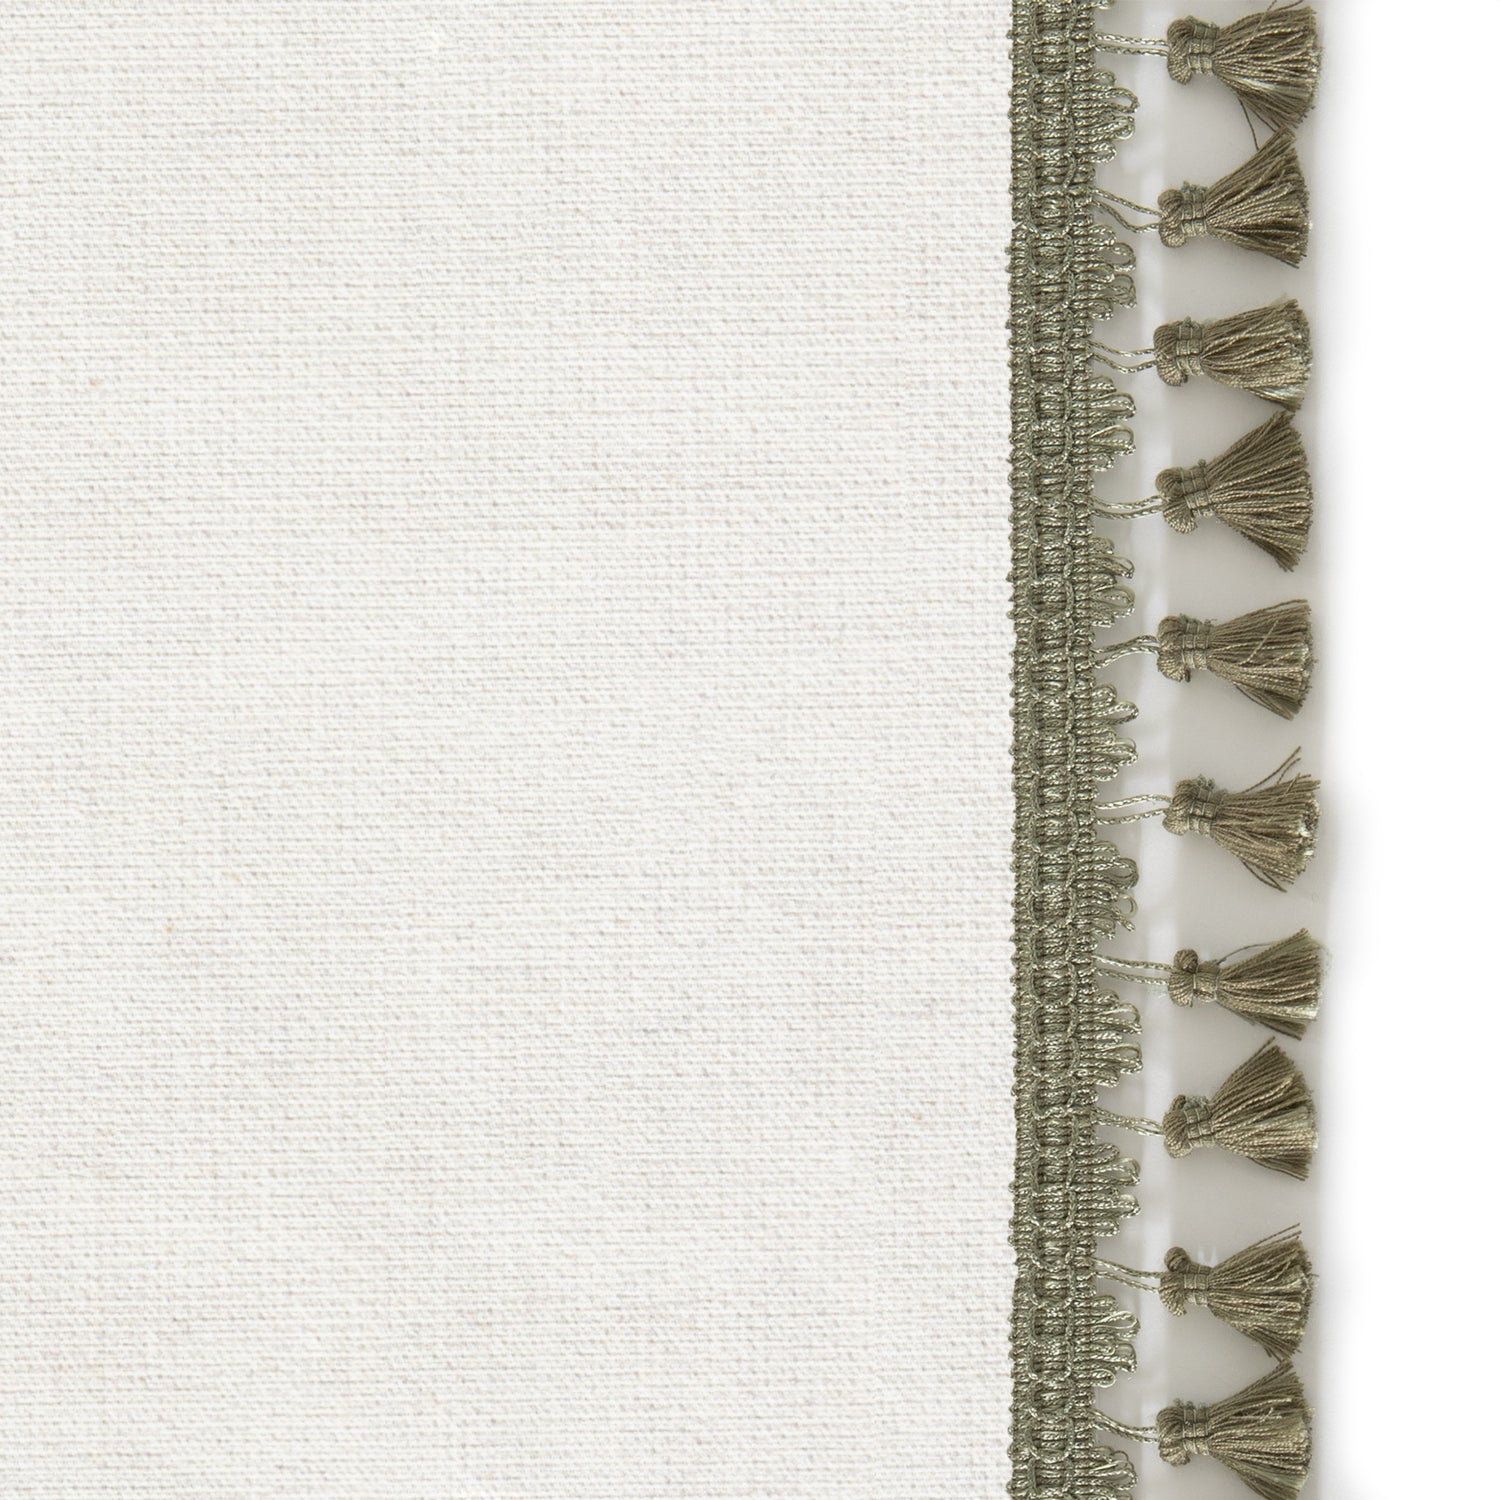 Upclose picture of Flour custom Natural Whiteshower curtain with sage tassel trim